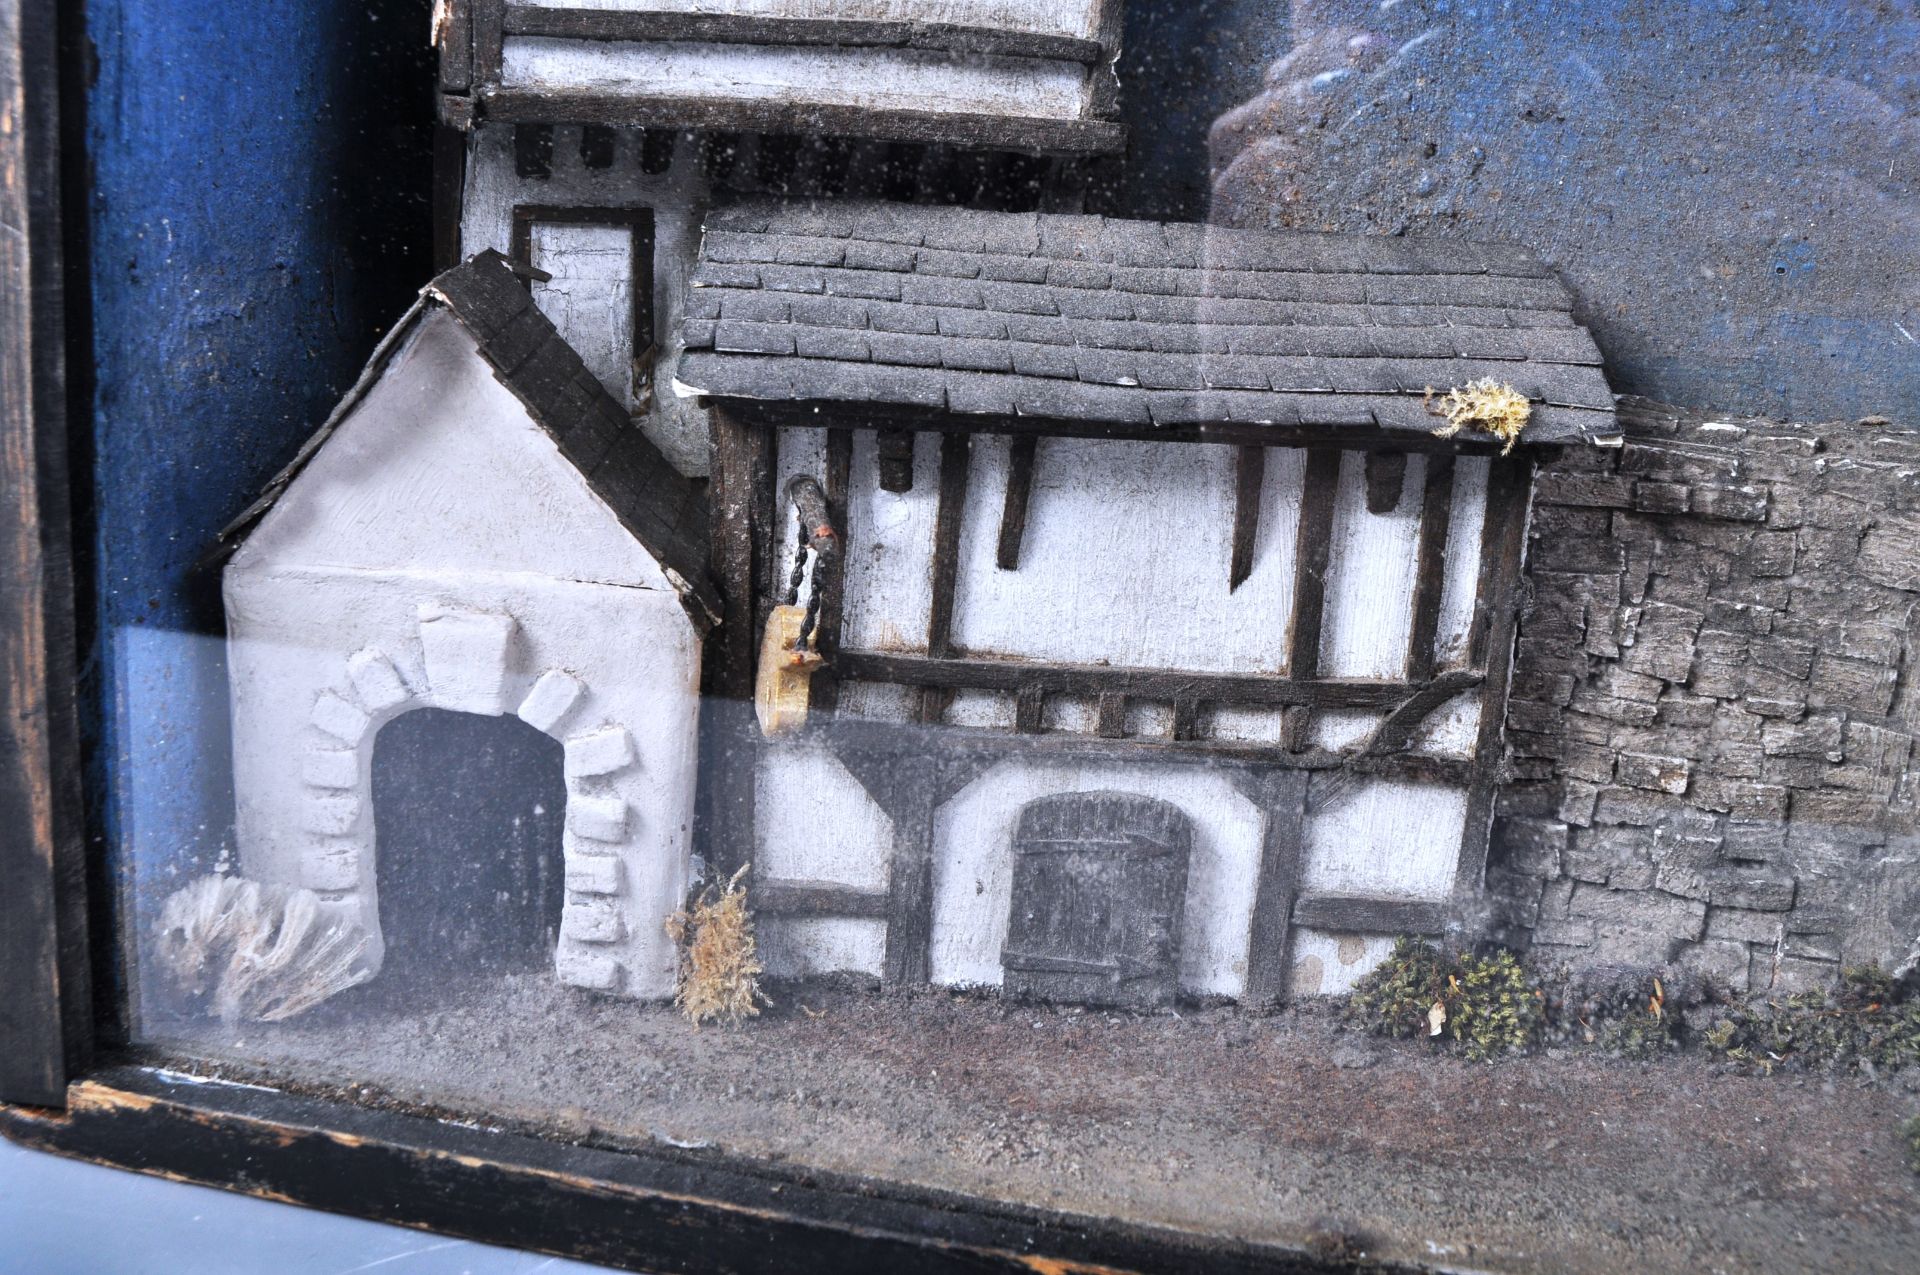 EARLY 20TH CENTURY GLASS CASED STREET SCENE - Image 3 of 6